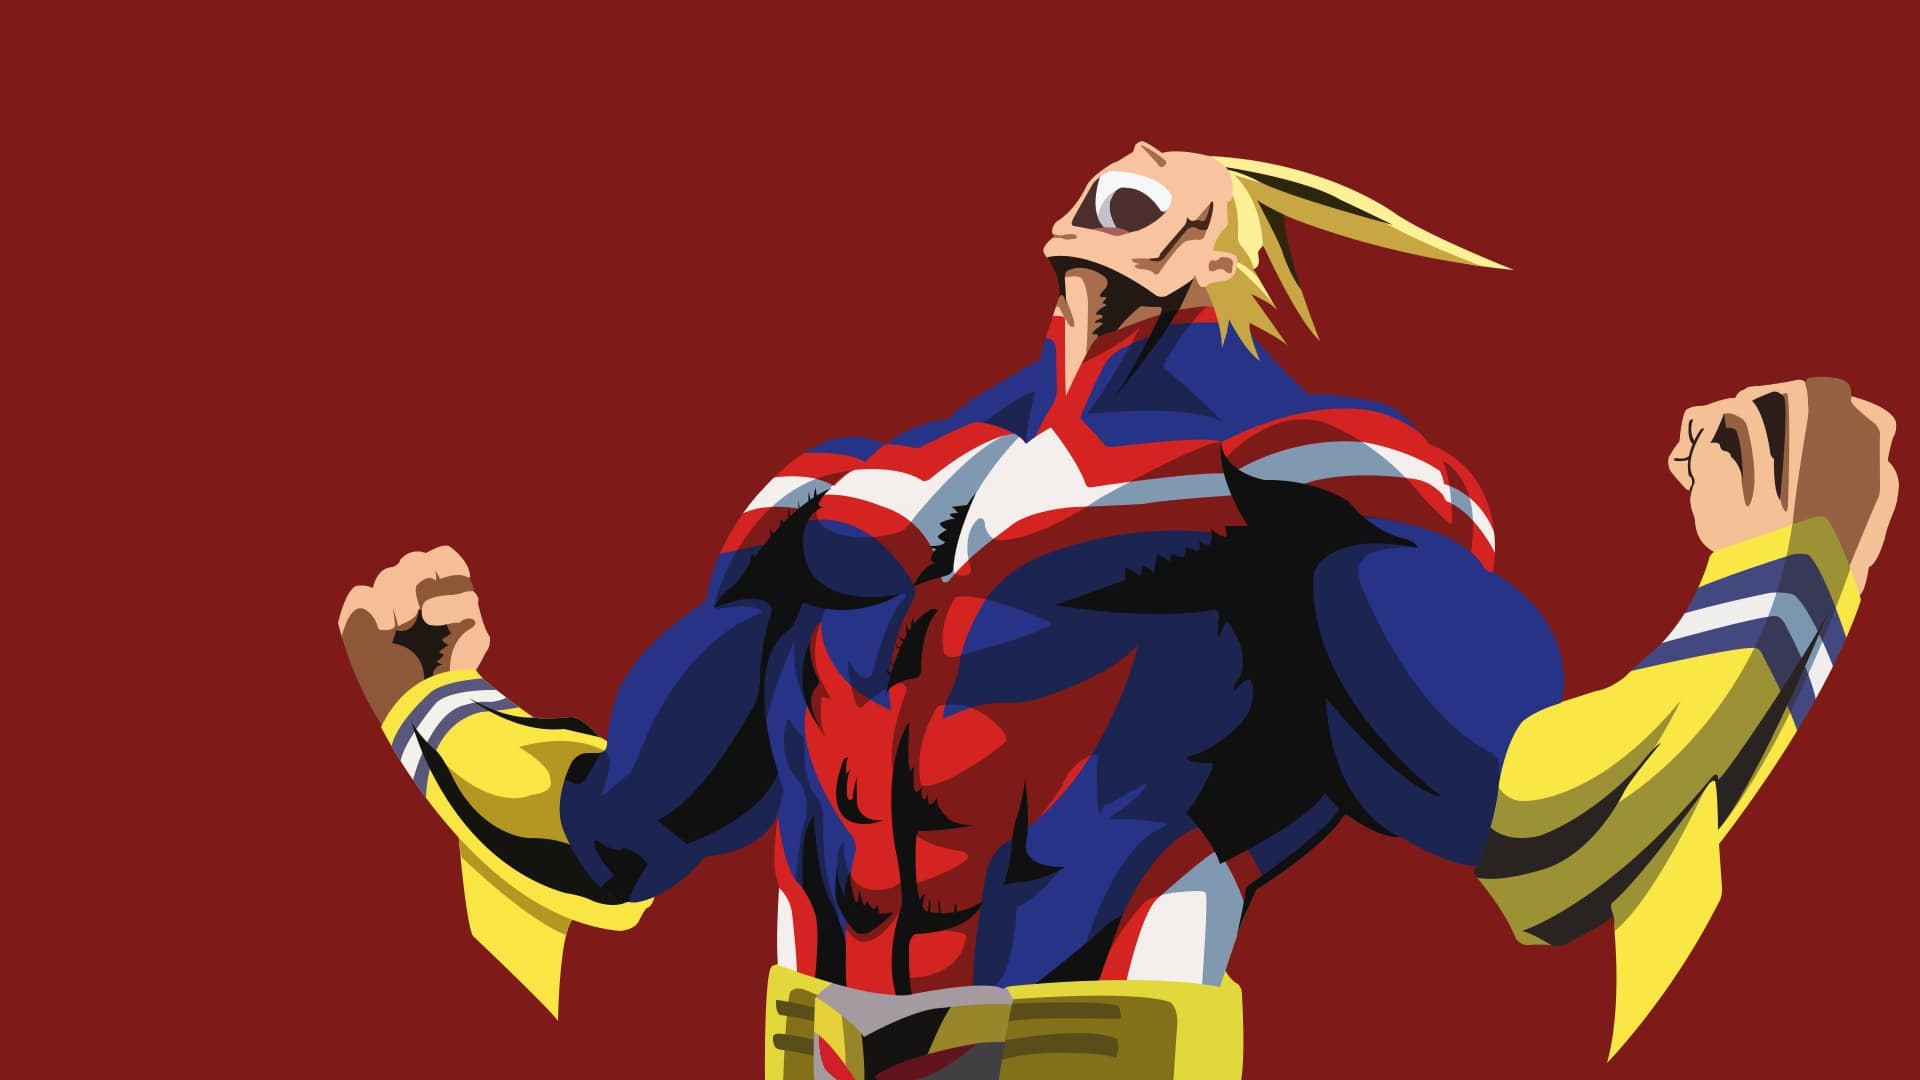 Wallpaper Of All Might, My Hero Academia Background - All Might Wallpaper Hd , HD Wallpaper & Backgrounds